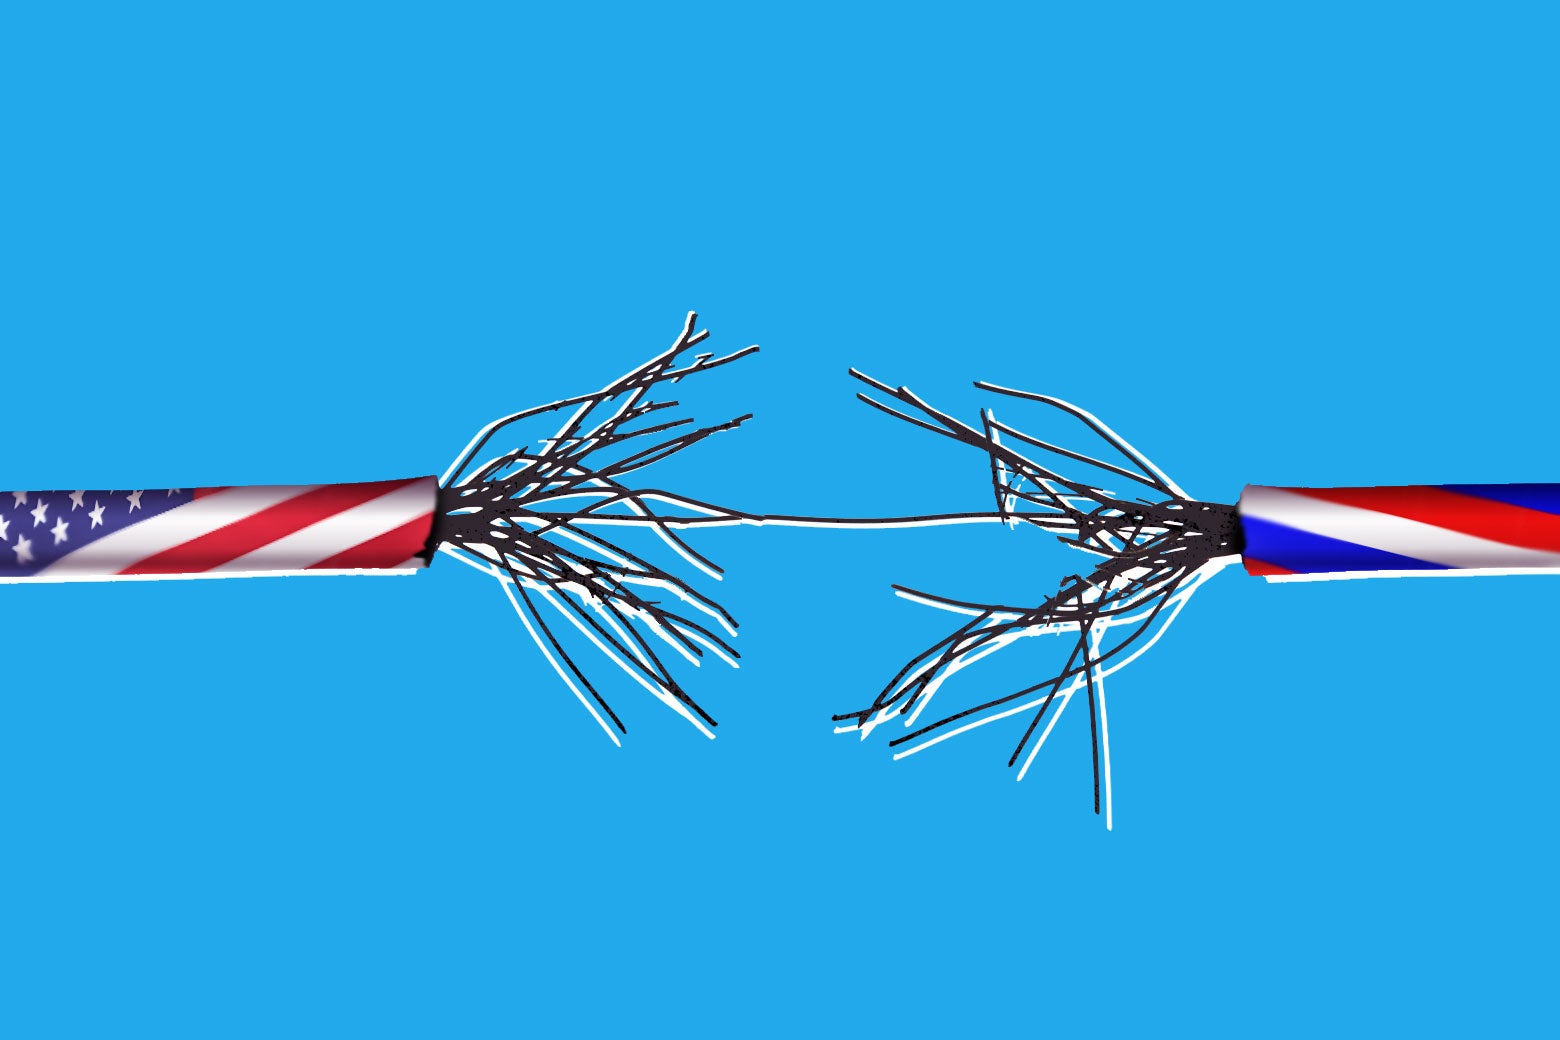 A fraying cable with a U.S. flag on one side and a Russian flag on the other.